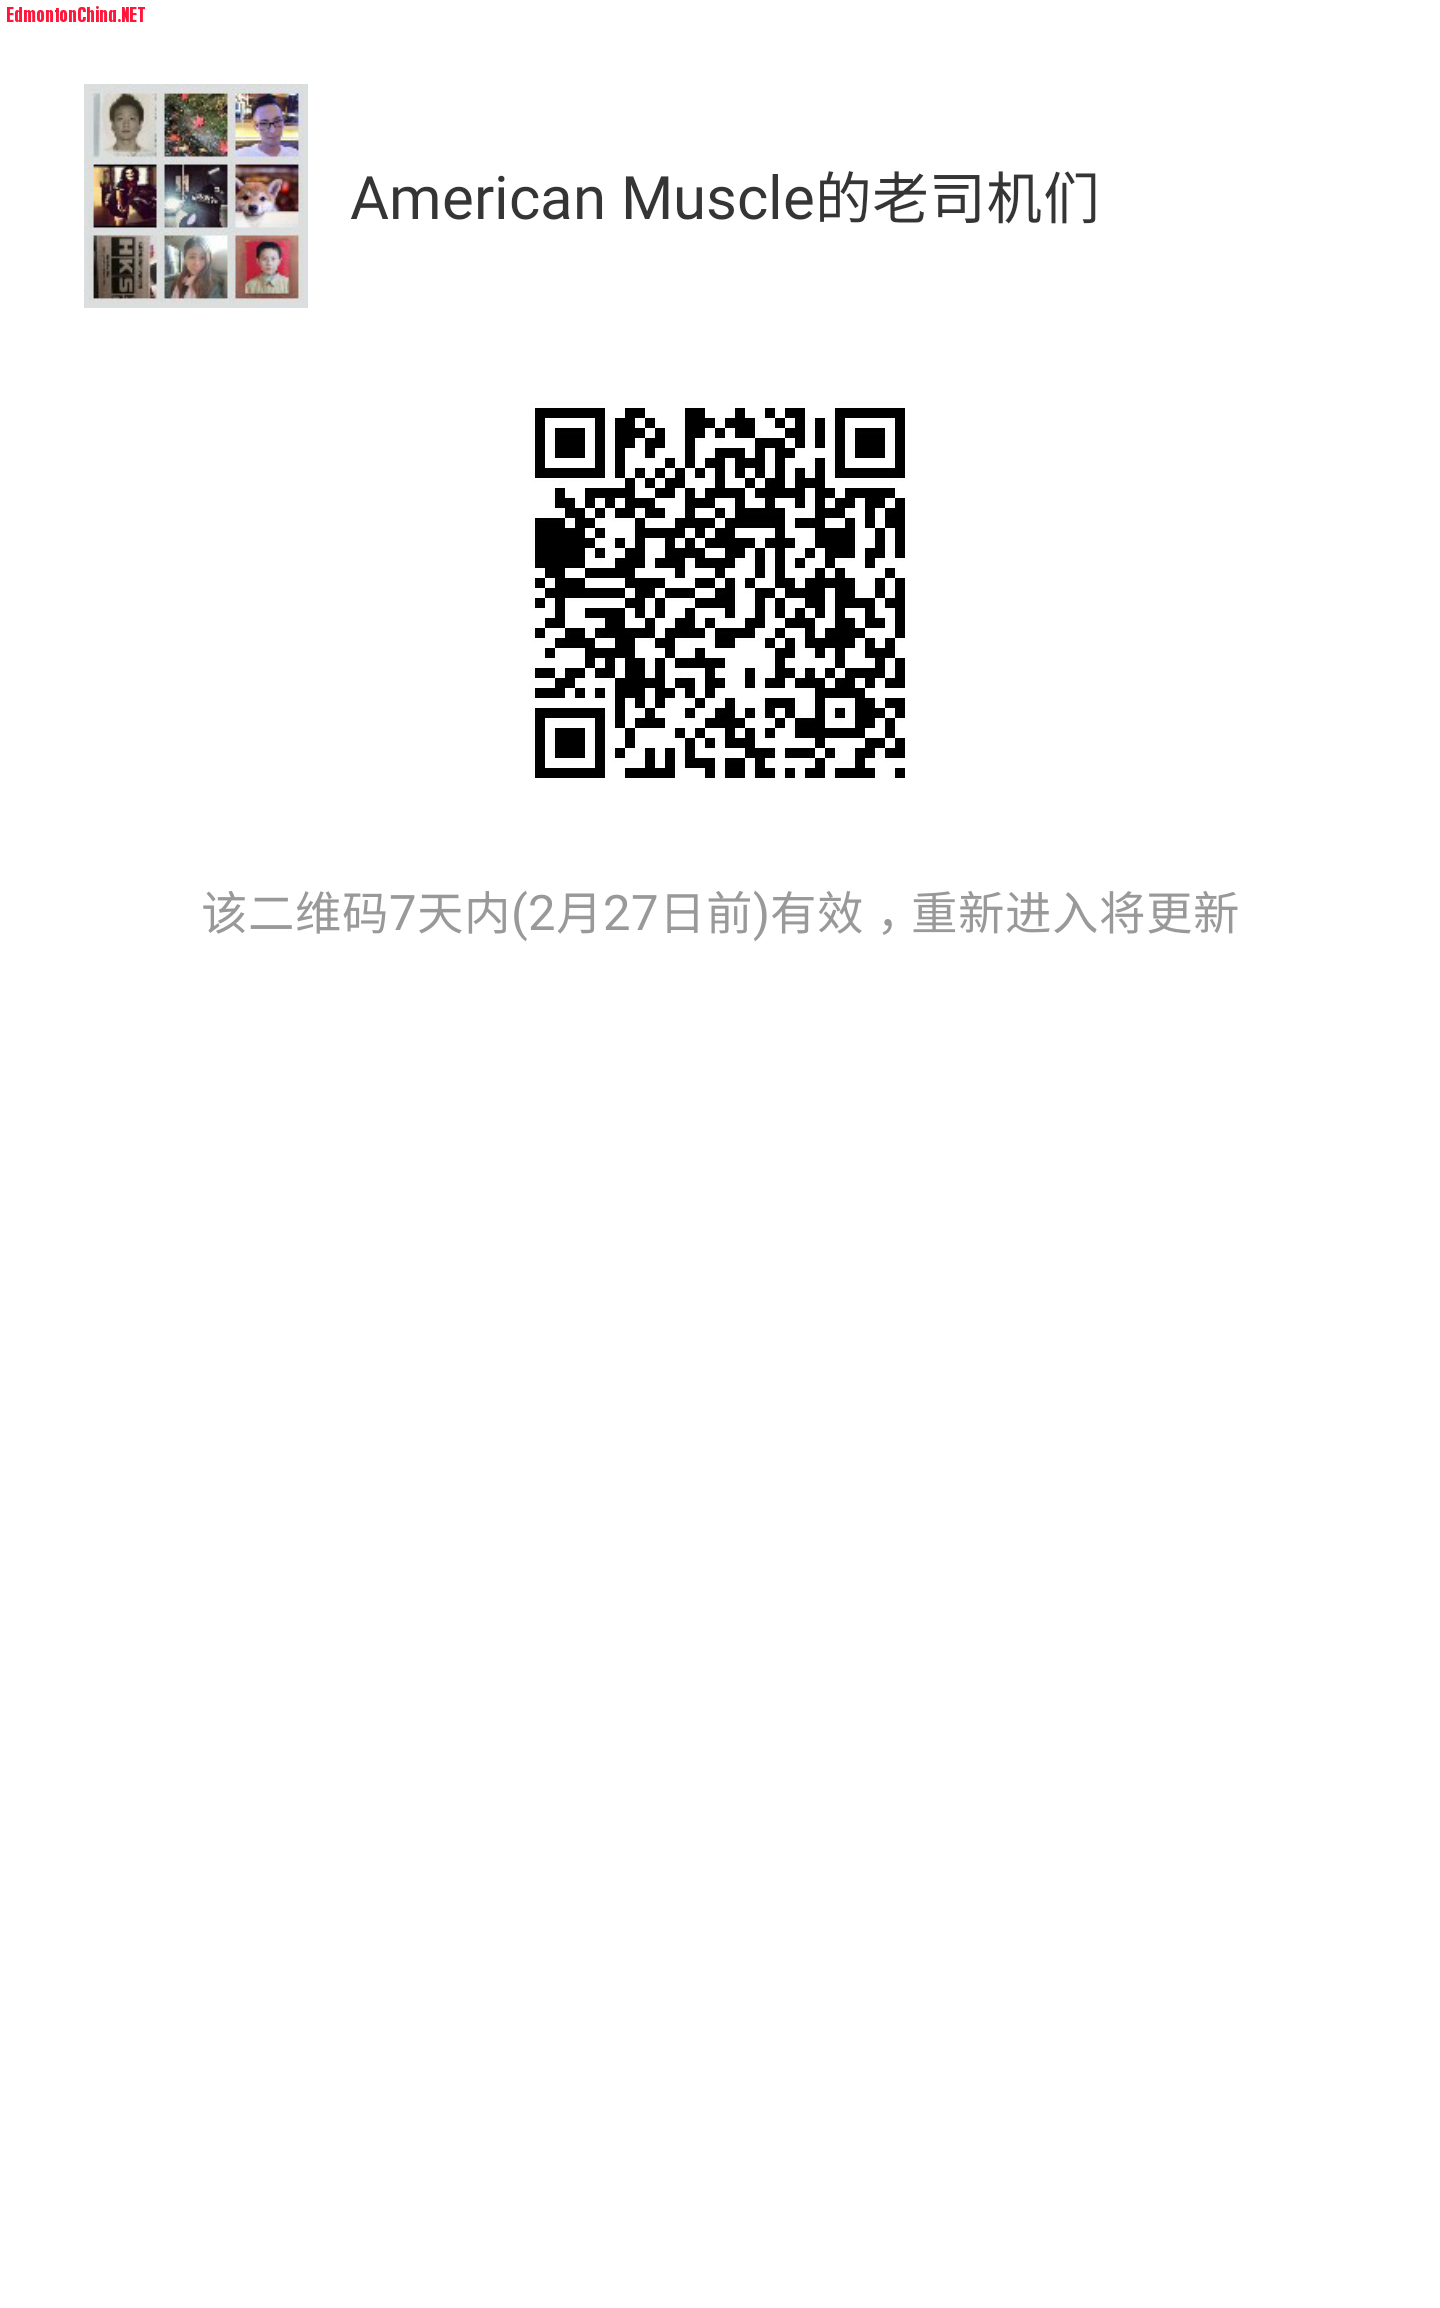 mmqrcode1487619008056.png